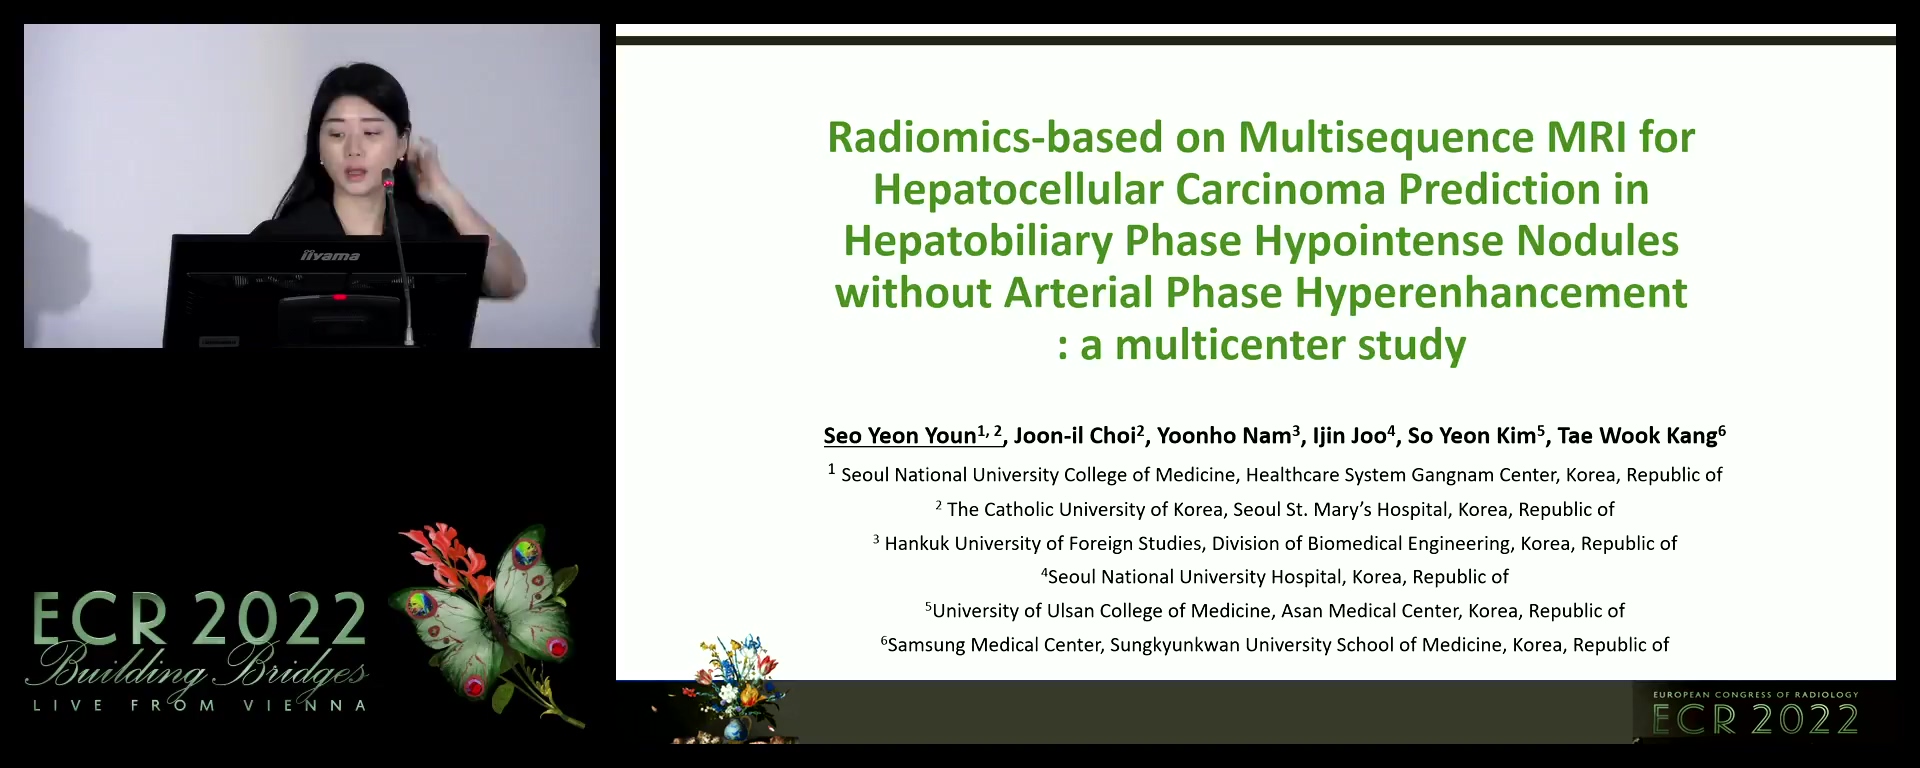 Radiomics-based on multisequence MRI for hepatocellular carcinoma prediction in hepatobiliary phase hypointense nodules without arterial phase hyperenhancement: a multicentre study